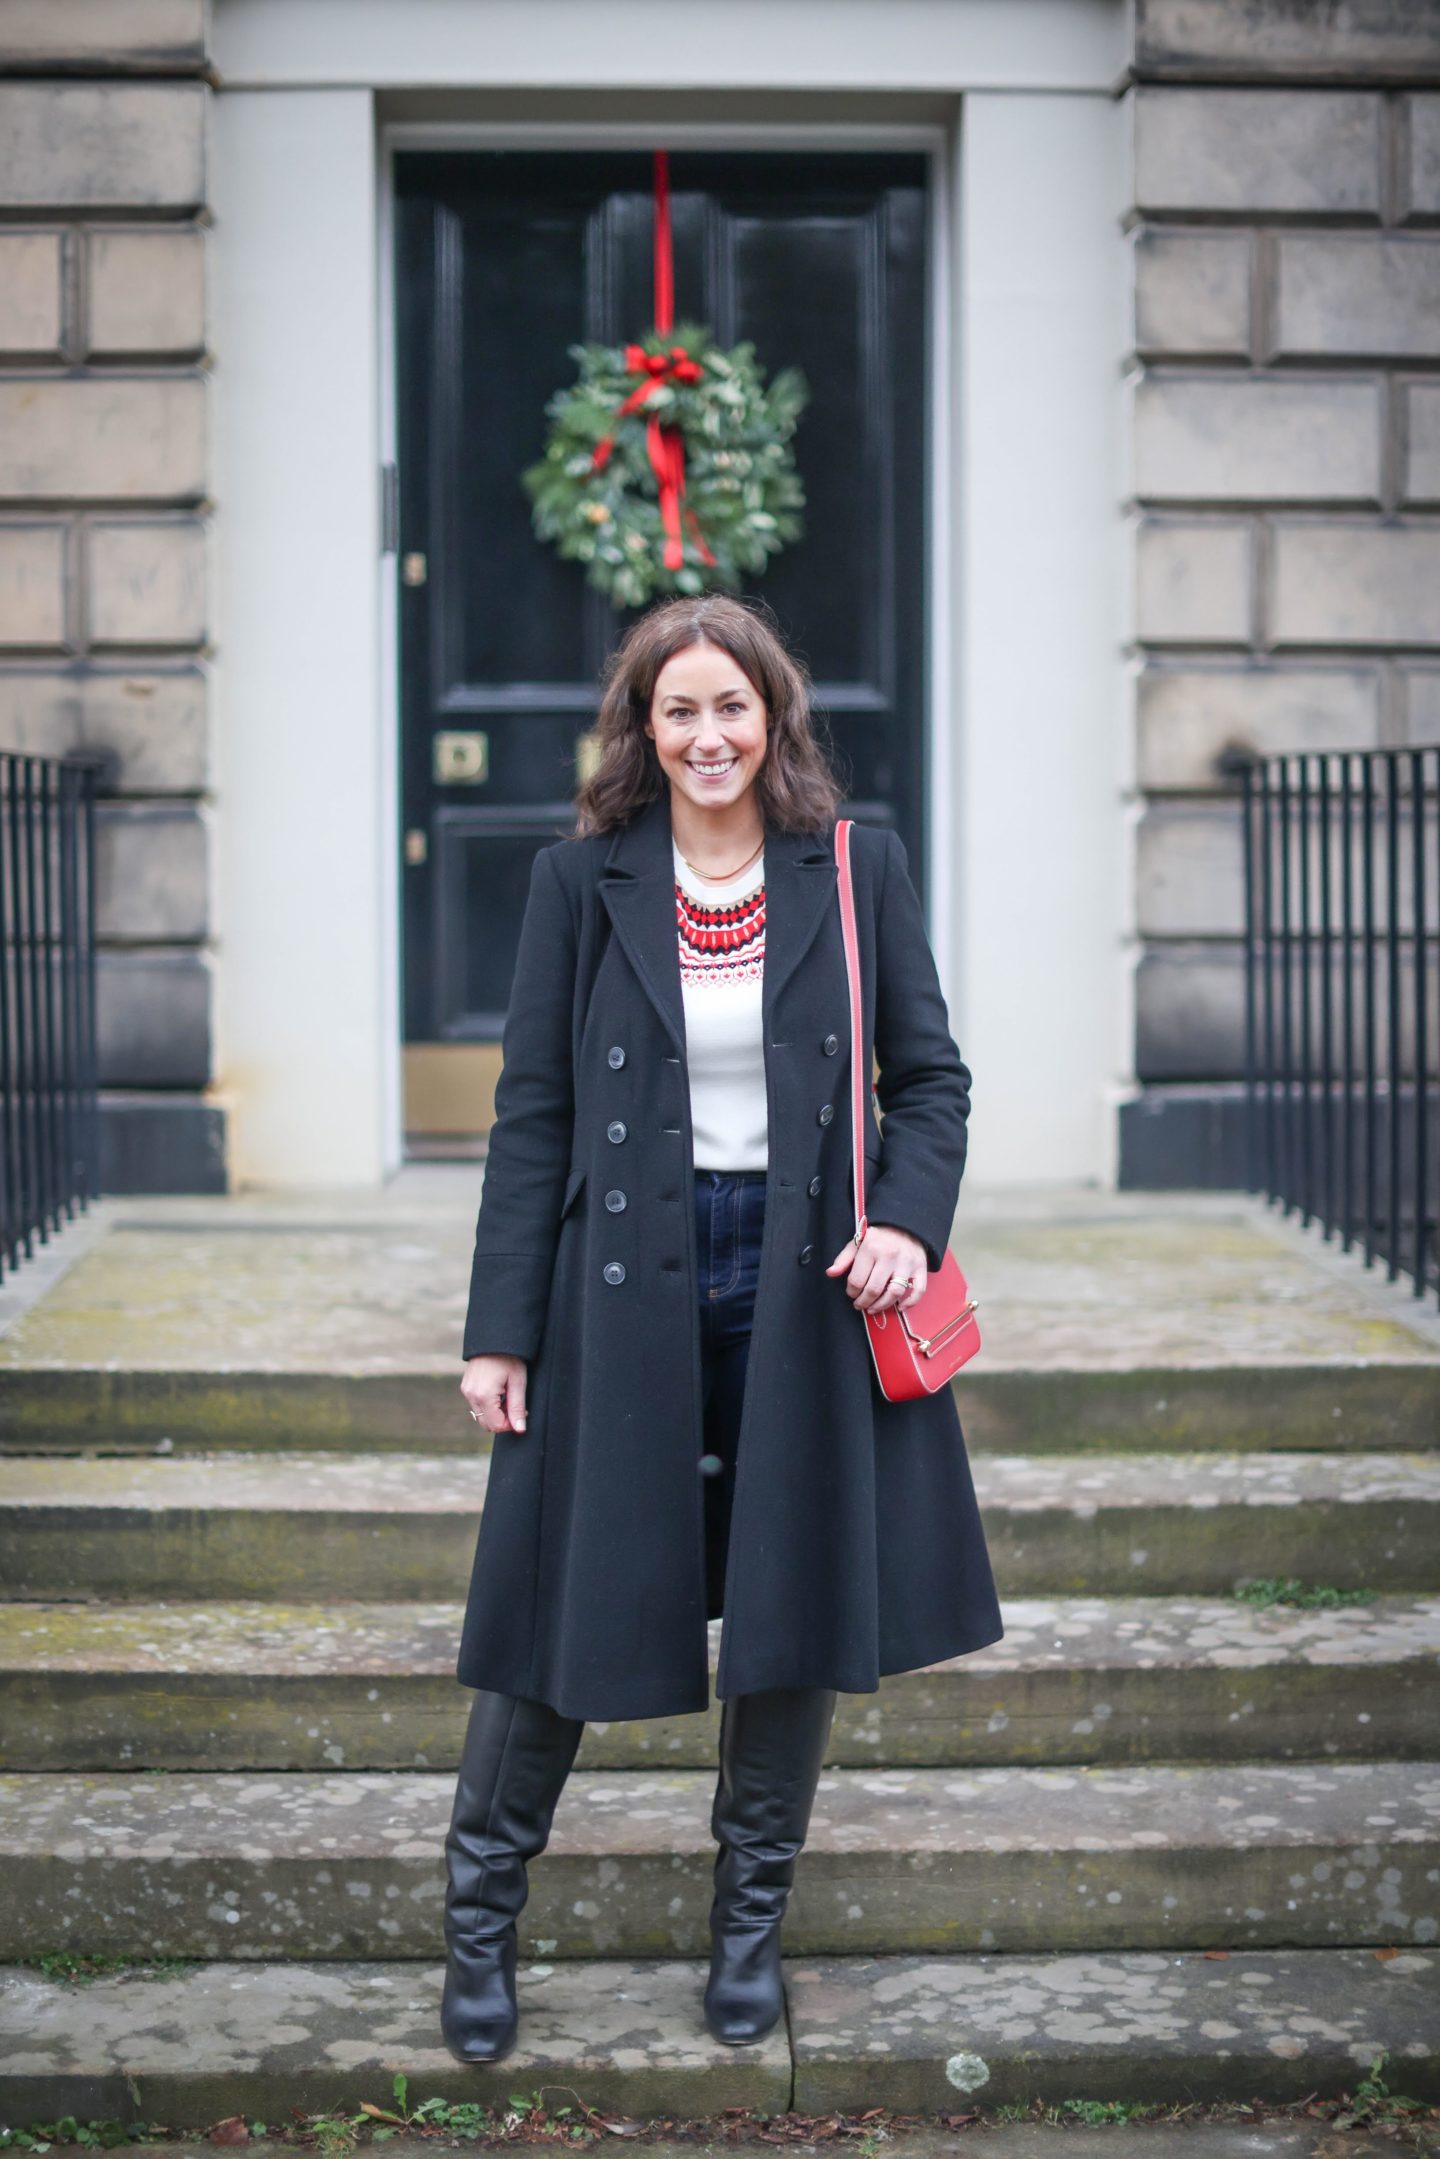 A woman wearing a fit and flare black coat in front of a door with a Christmas wreath